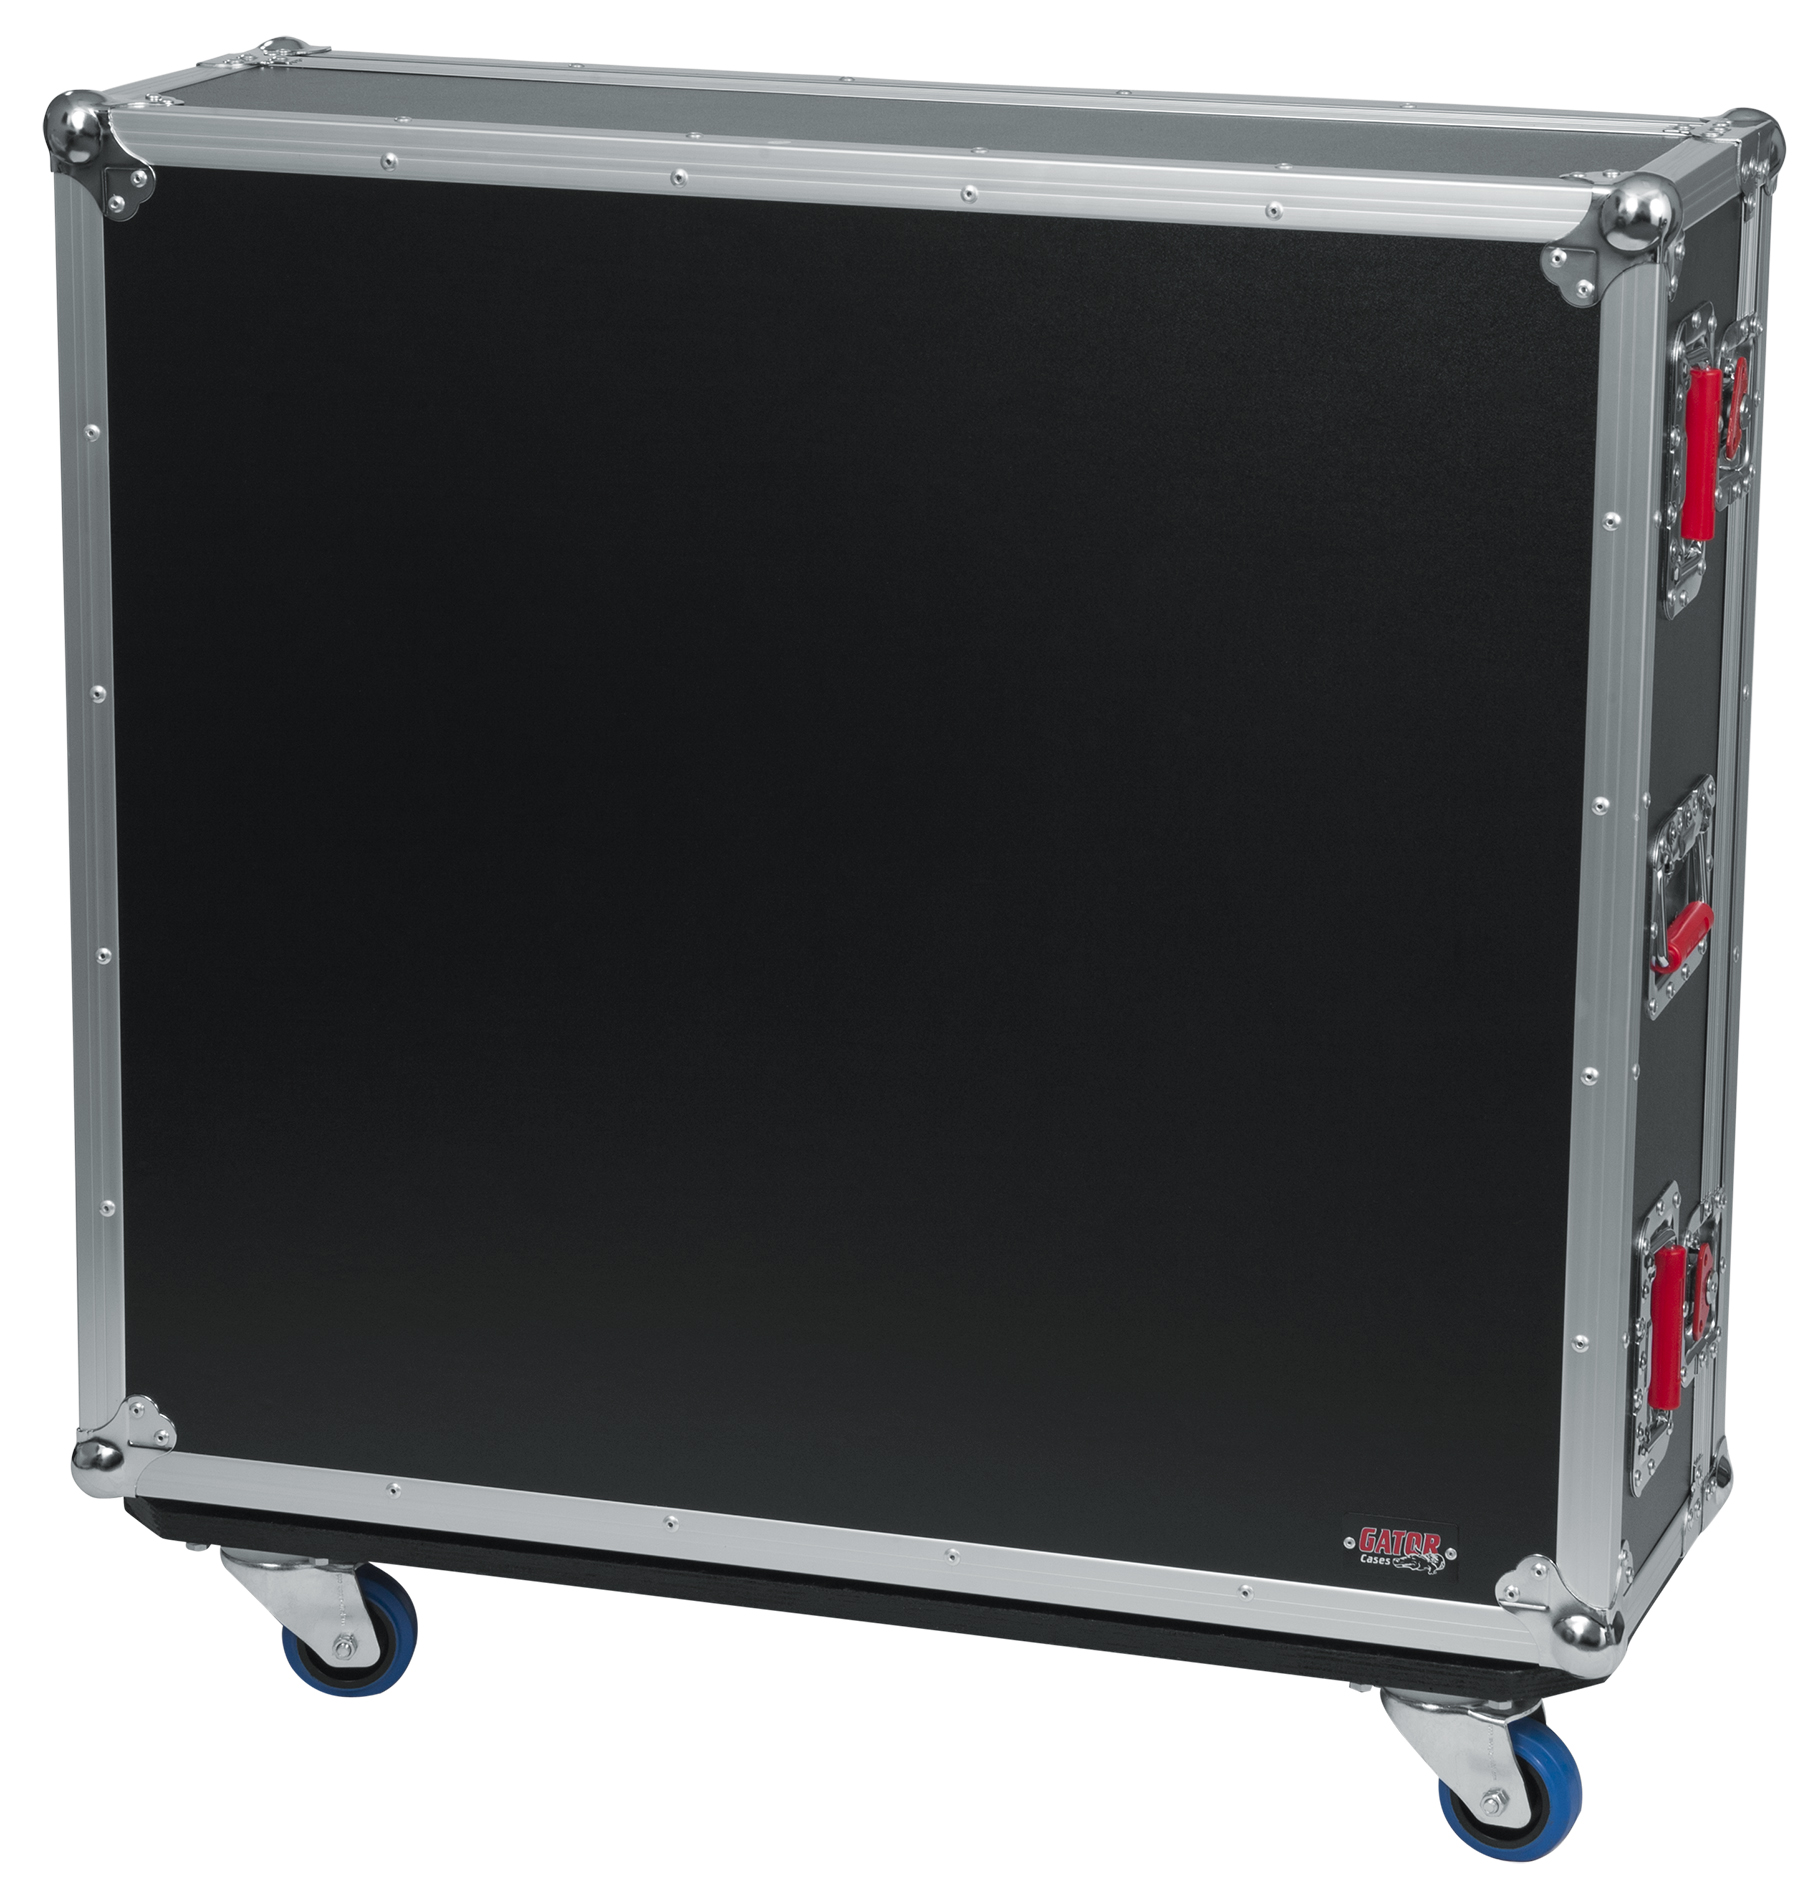 G-TOUR doghouse style case for Studiolive 32 III